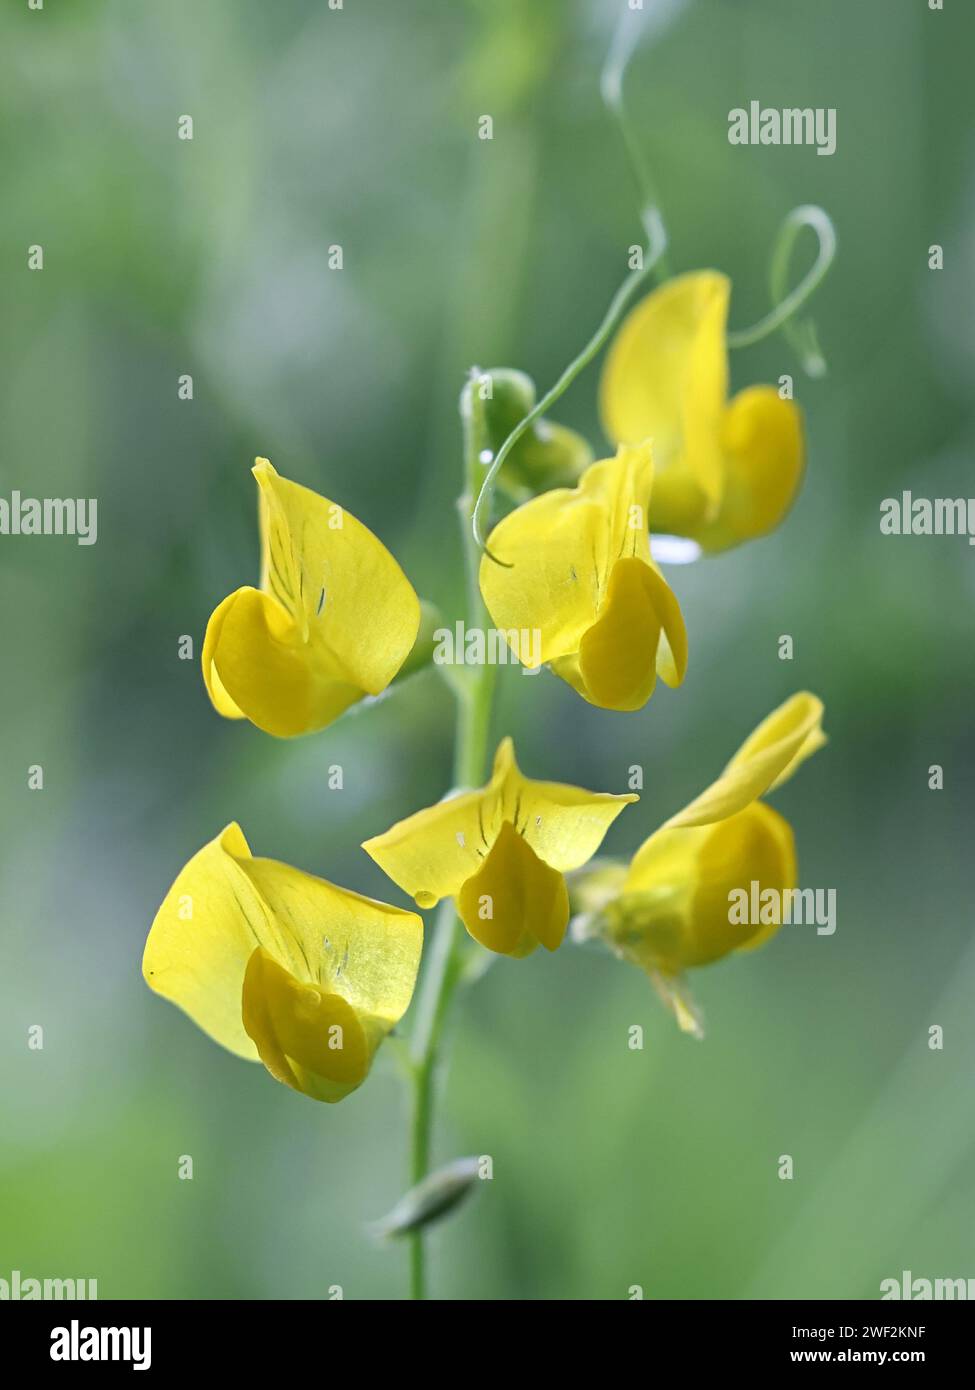 Meadow Vetchling, Lathyrus pratensis, also known as Meadow pea or Meadow pea-vine, wild flowering plant from Finland Stock Photo